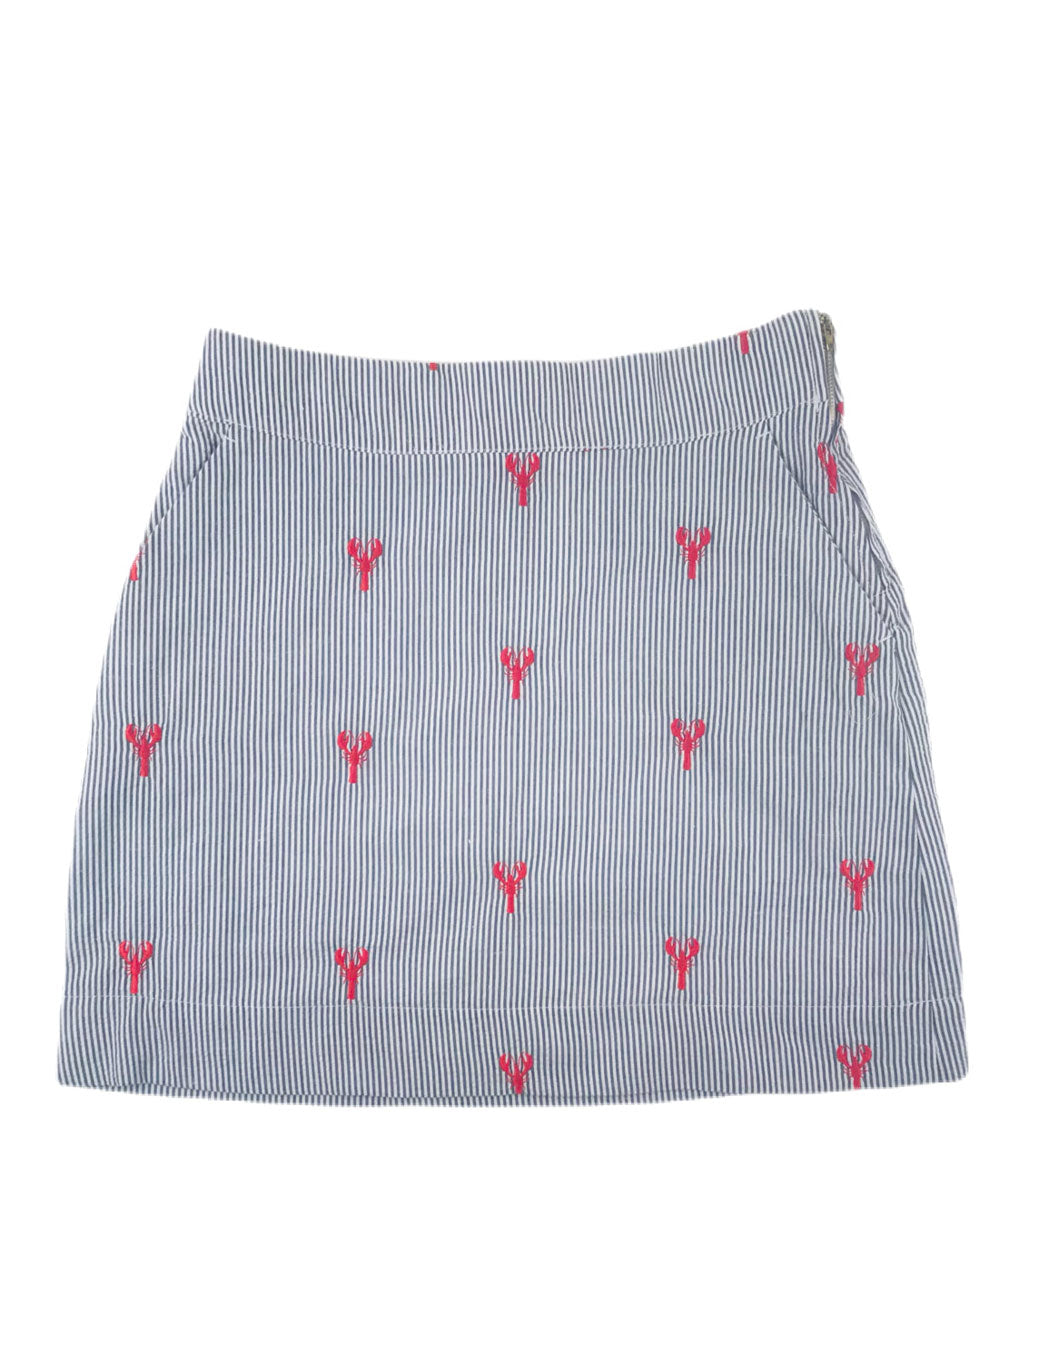 Navy Seersucker Women's Skirt with Red Embroidered Lobsters